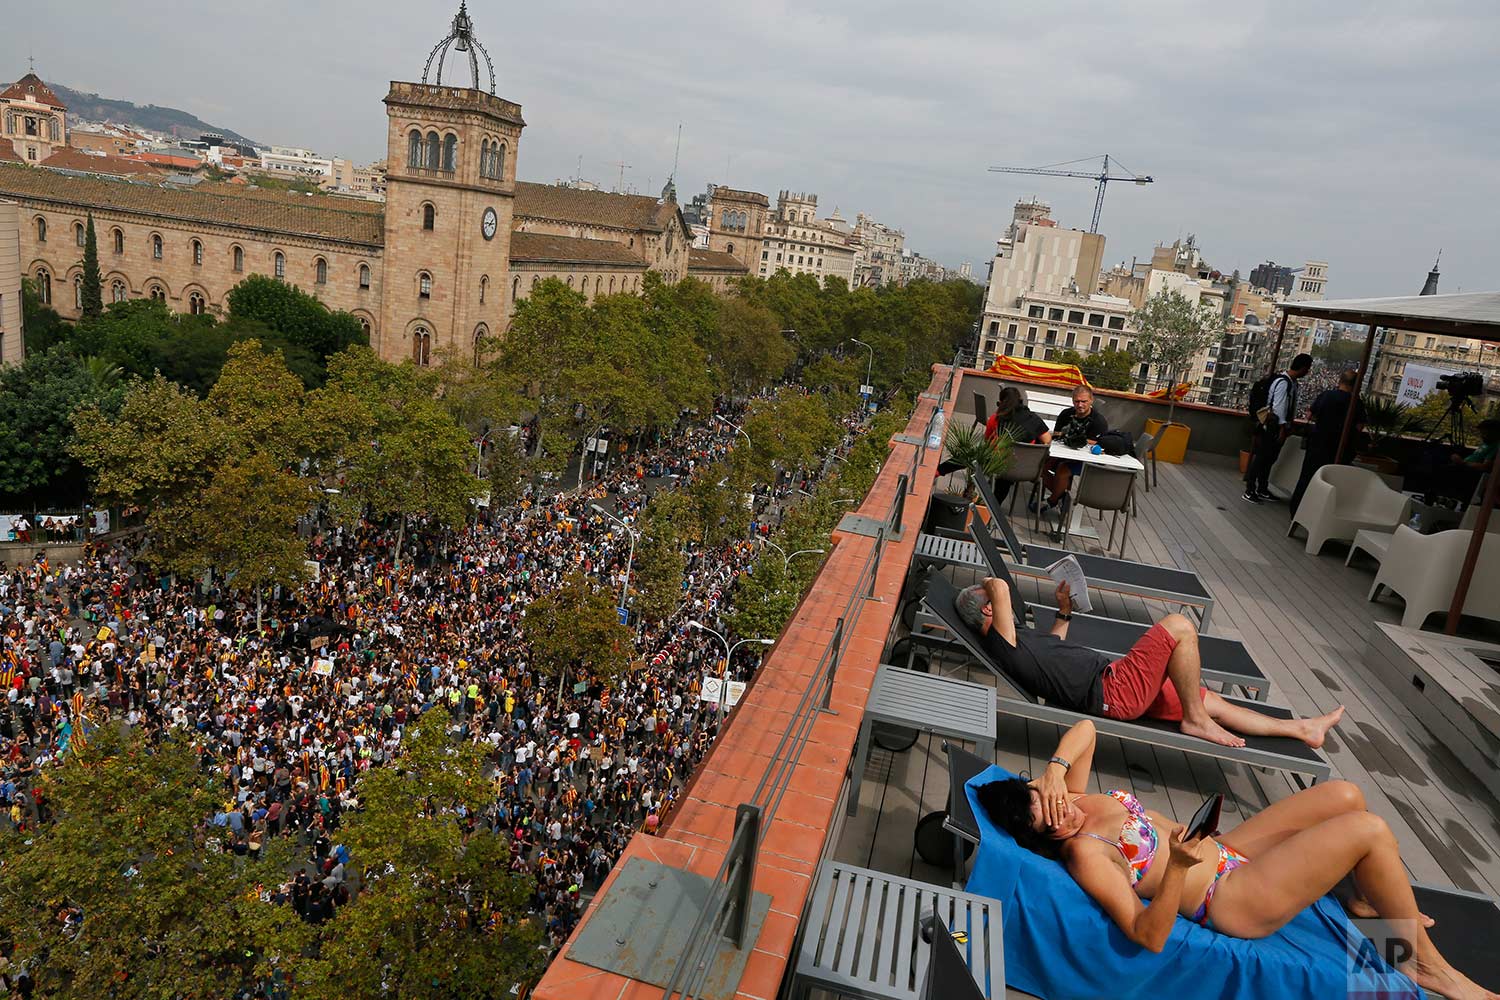  In this Tuesday Oct. 3, 2017 photo, a couple, tourists from Switzerland, sunbath at a terrace overlooking Universitat square as demonstrators gather in protest in downtown Barcelona, Spain. Labor unions and grassroots pro-independence groups are urg